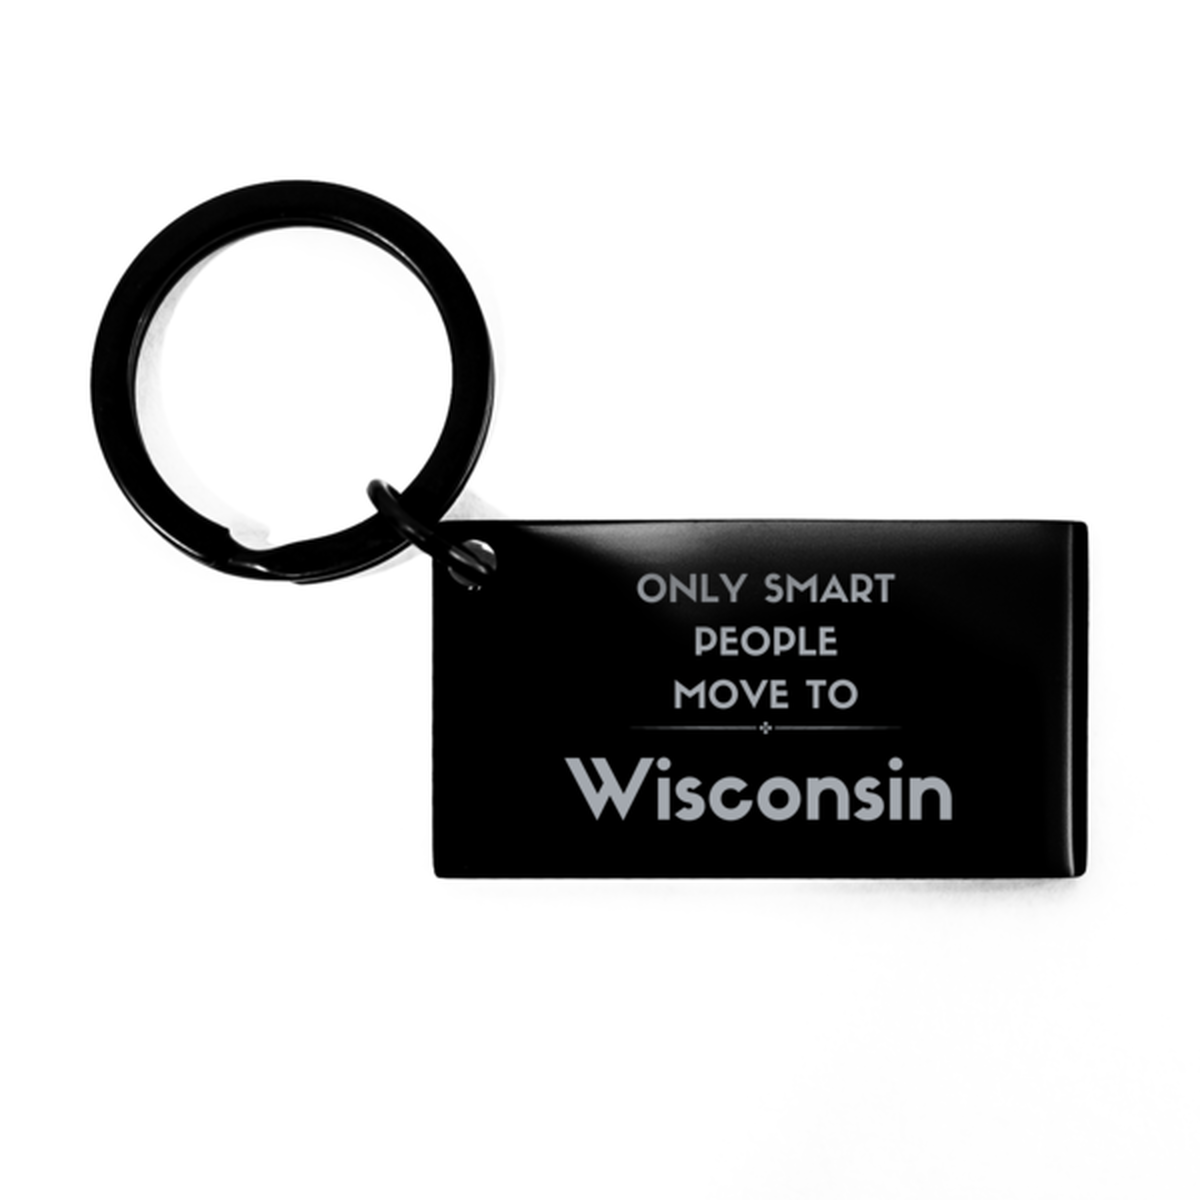 Only smart people move to Wisconsin Keychain, Gag Gifts For Wisconsin, Move to Wisconsin Gifts for Friends Coworker Funny Saying Quote